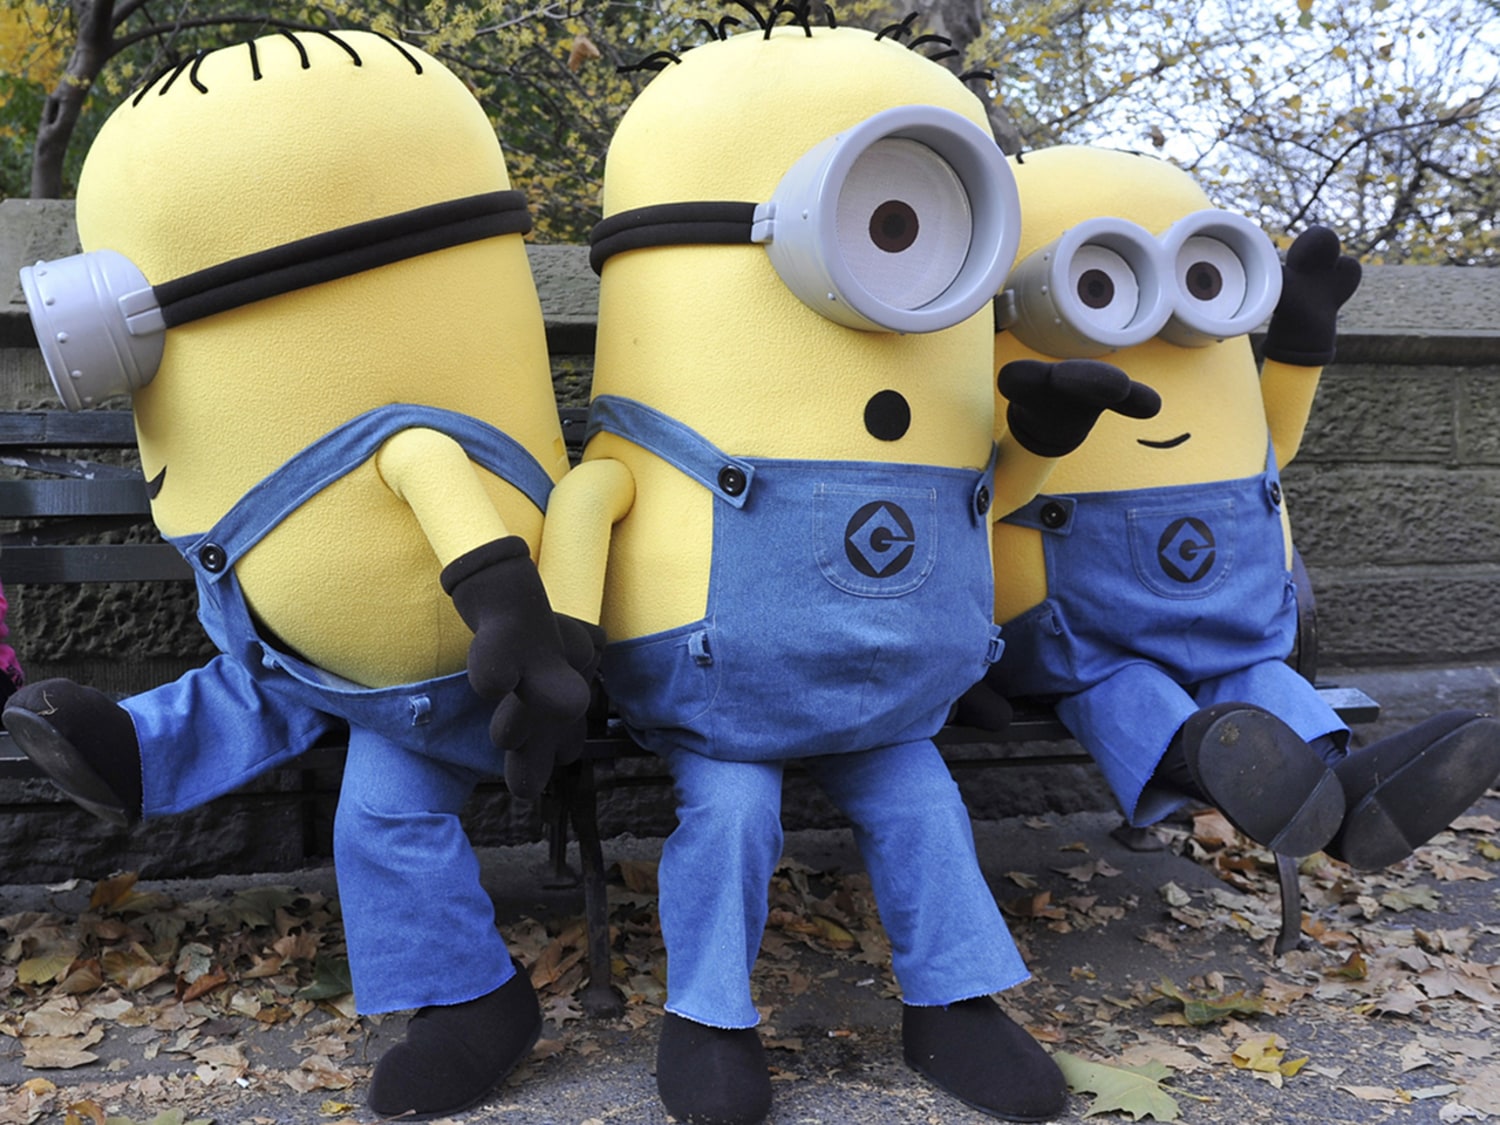 Most-searched Halloween costumes? Minions and Miley